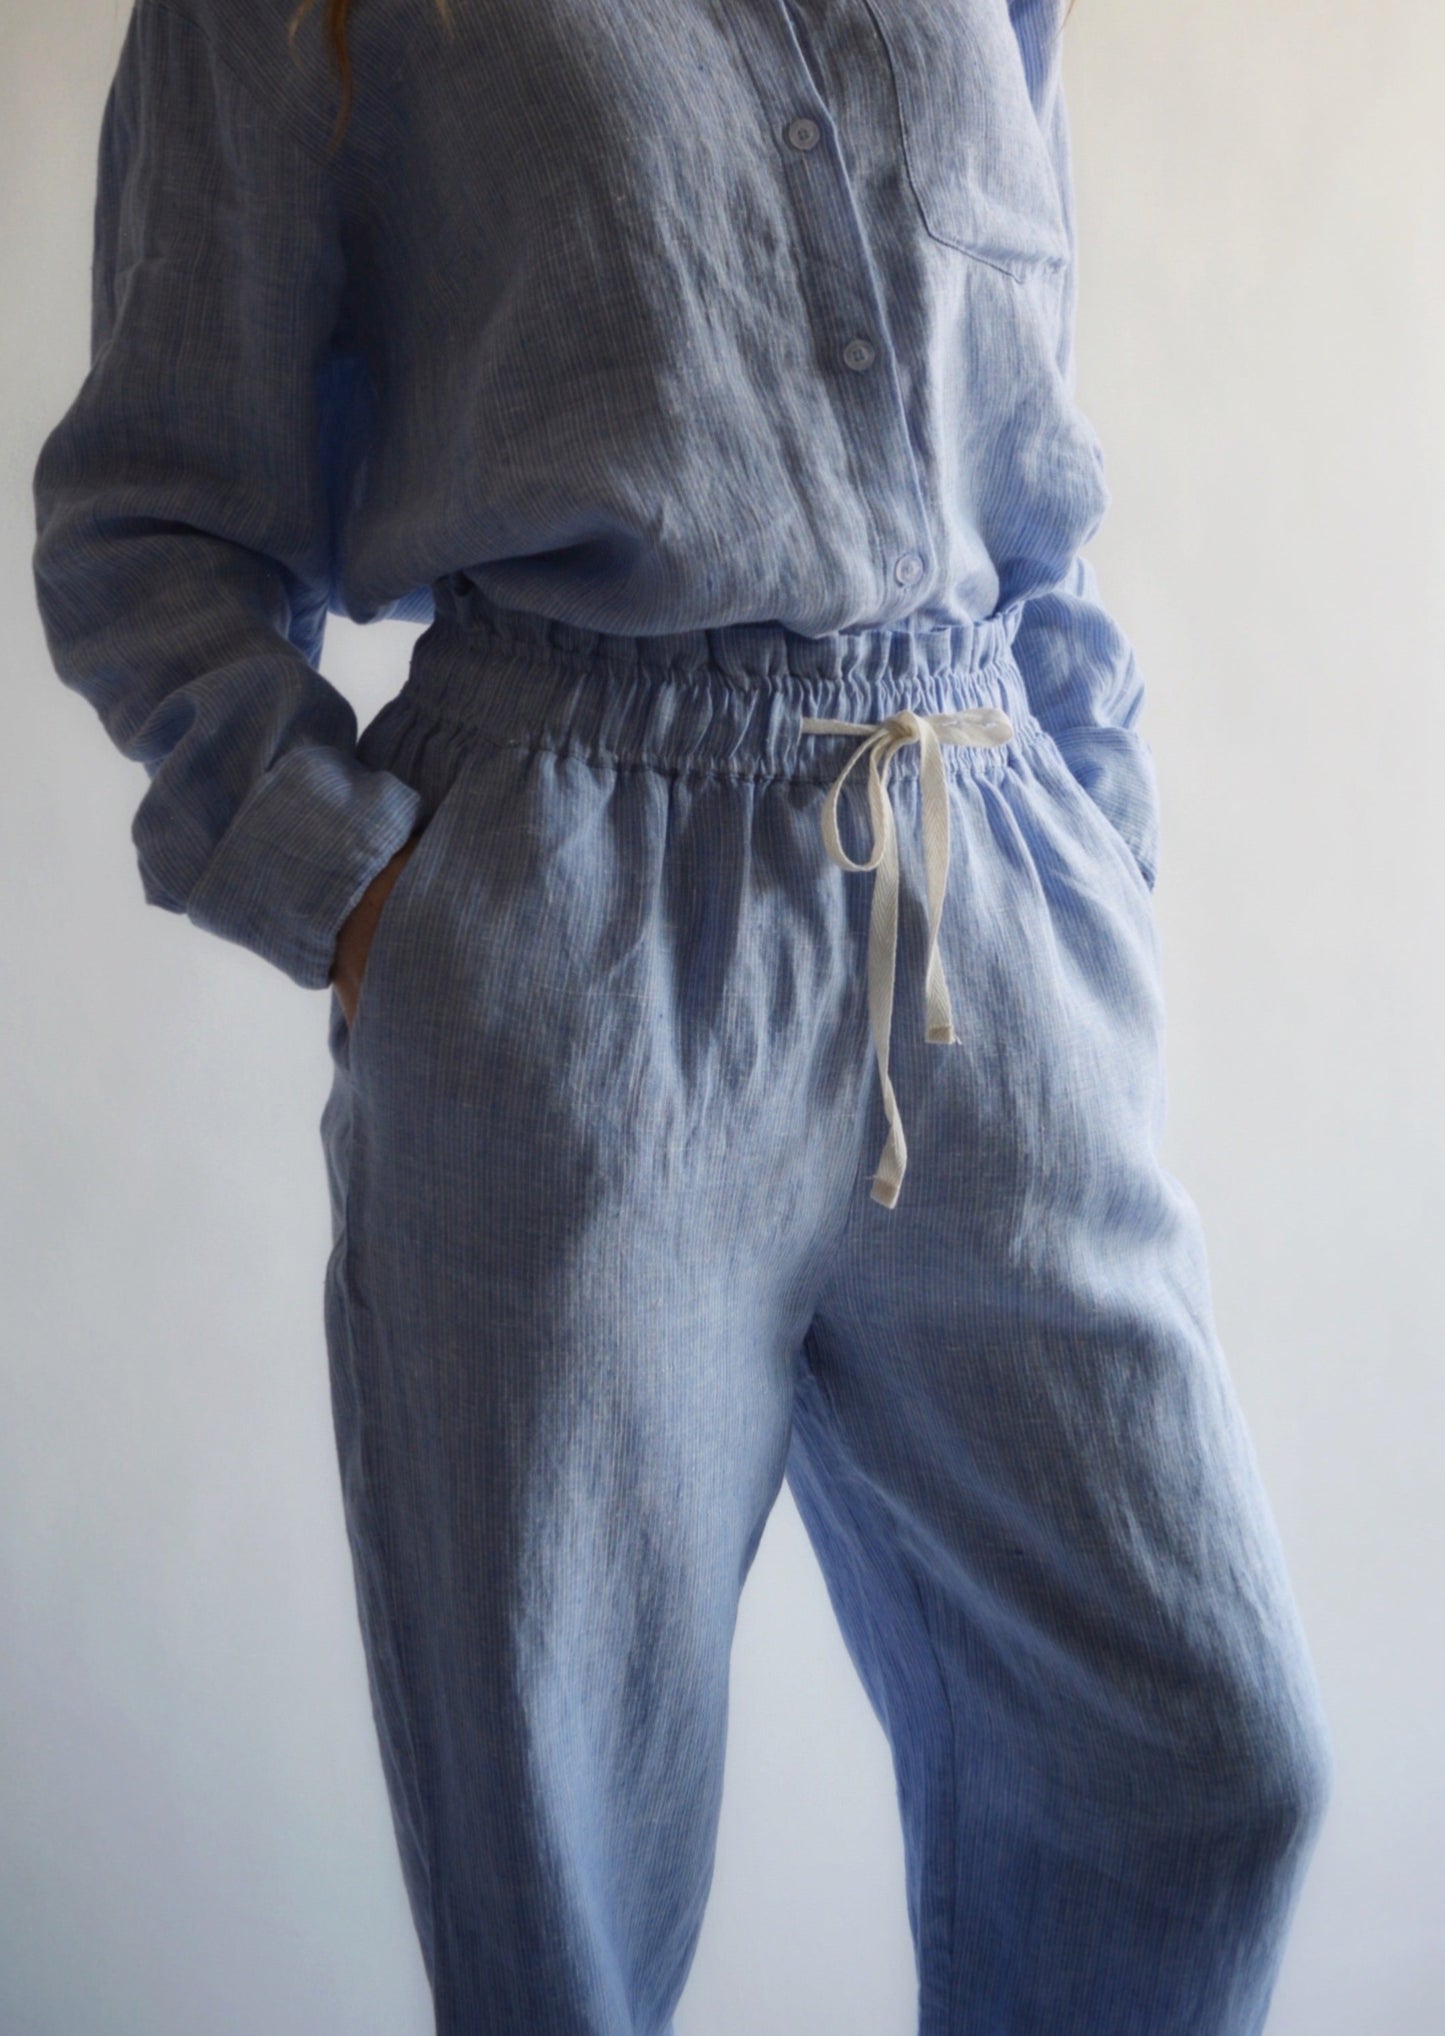 Linen Pants in Clear Sky color